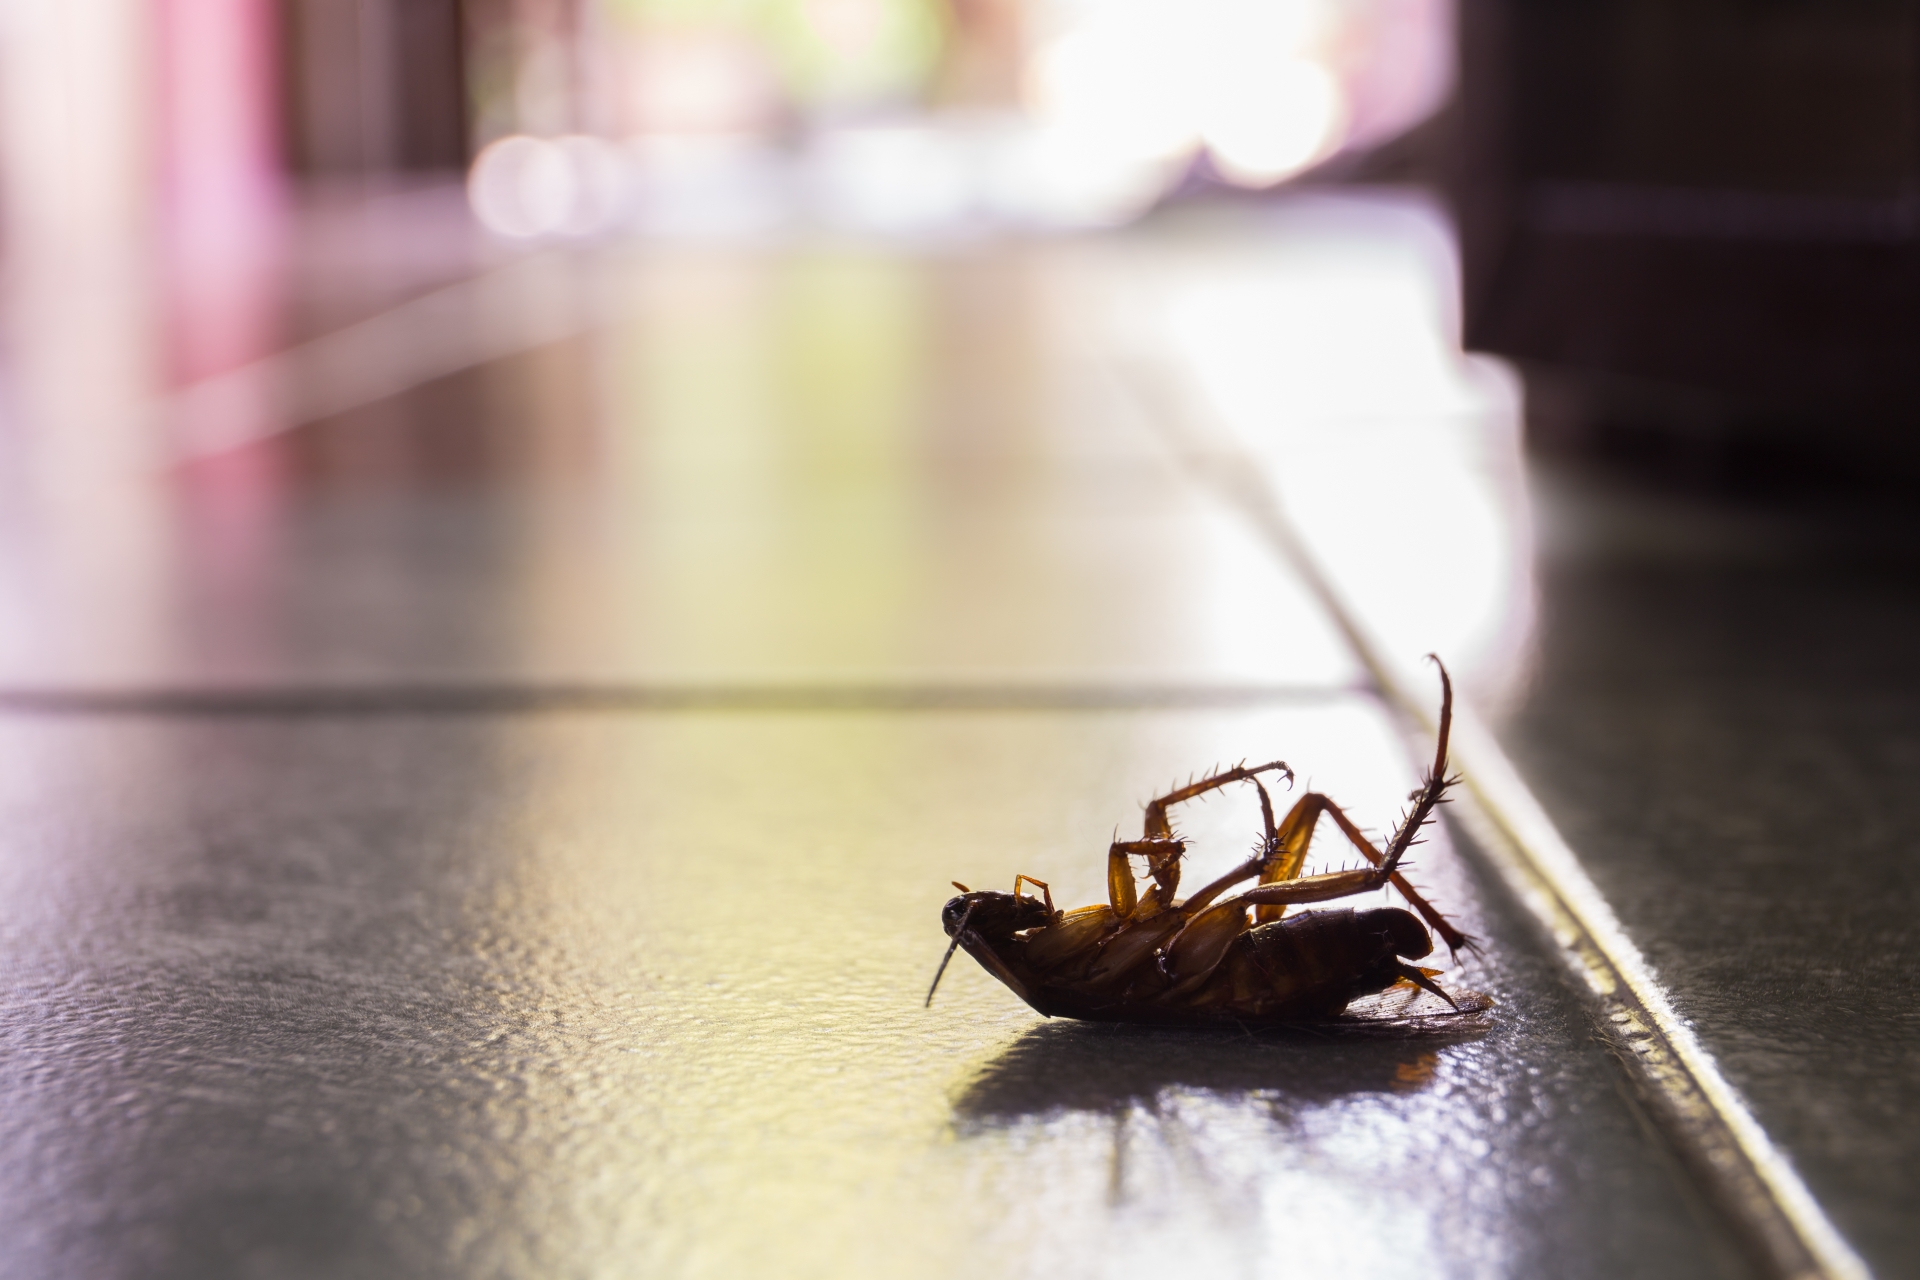 Cockroach Control, Pest Control in Orsett, Chafford Hundred, RM16. Call Now 020 8166 9746